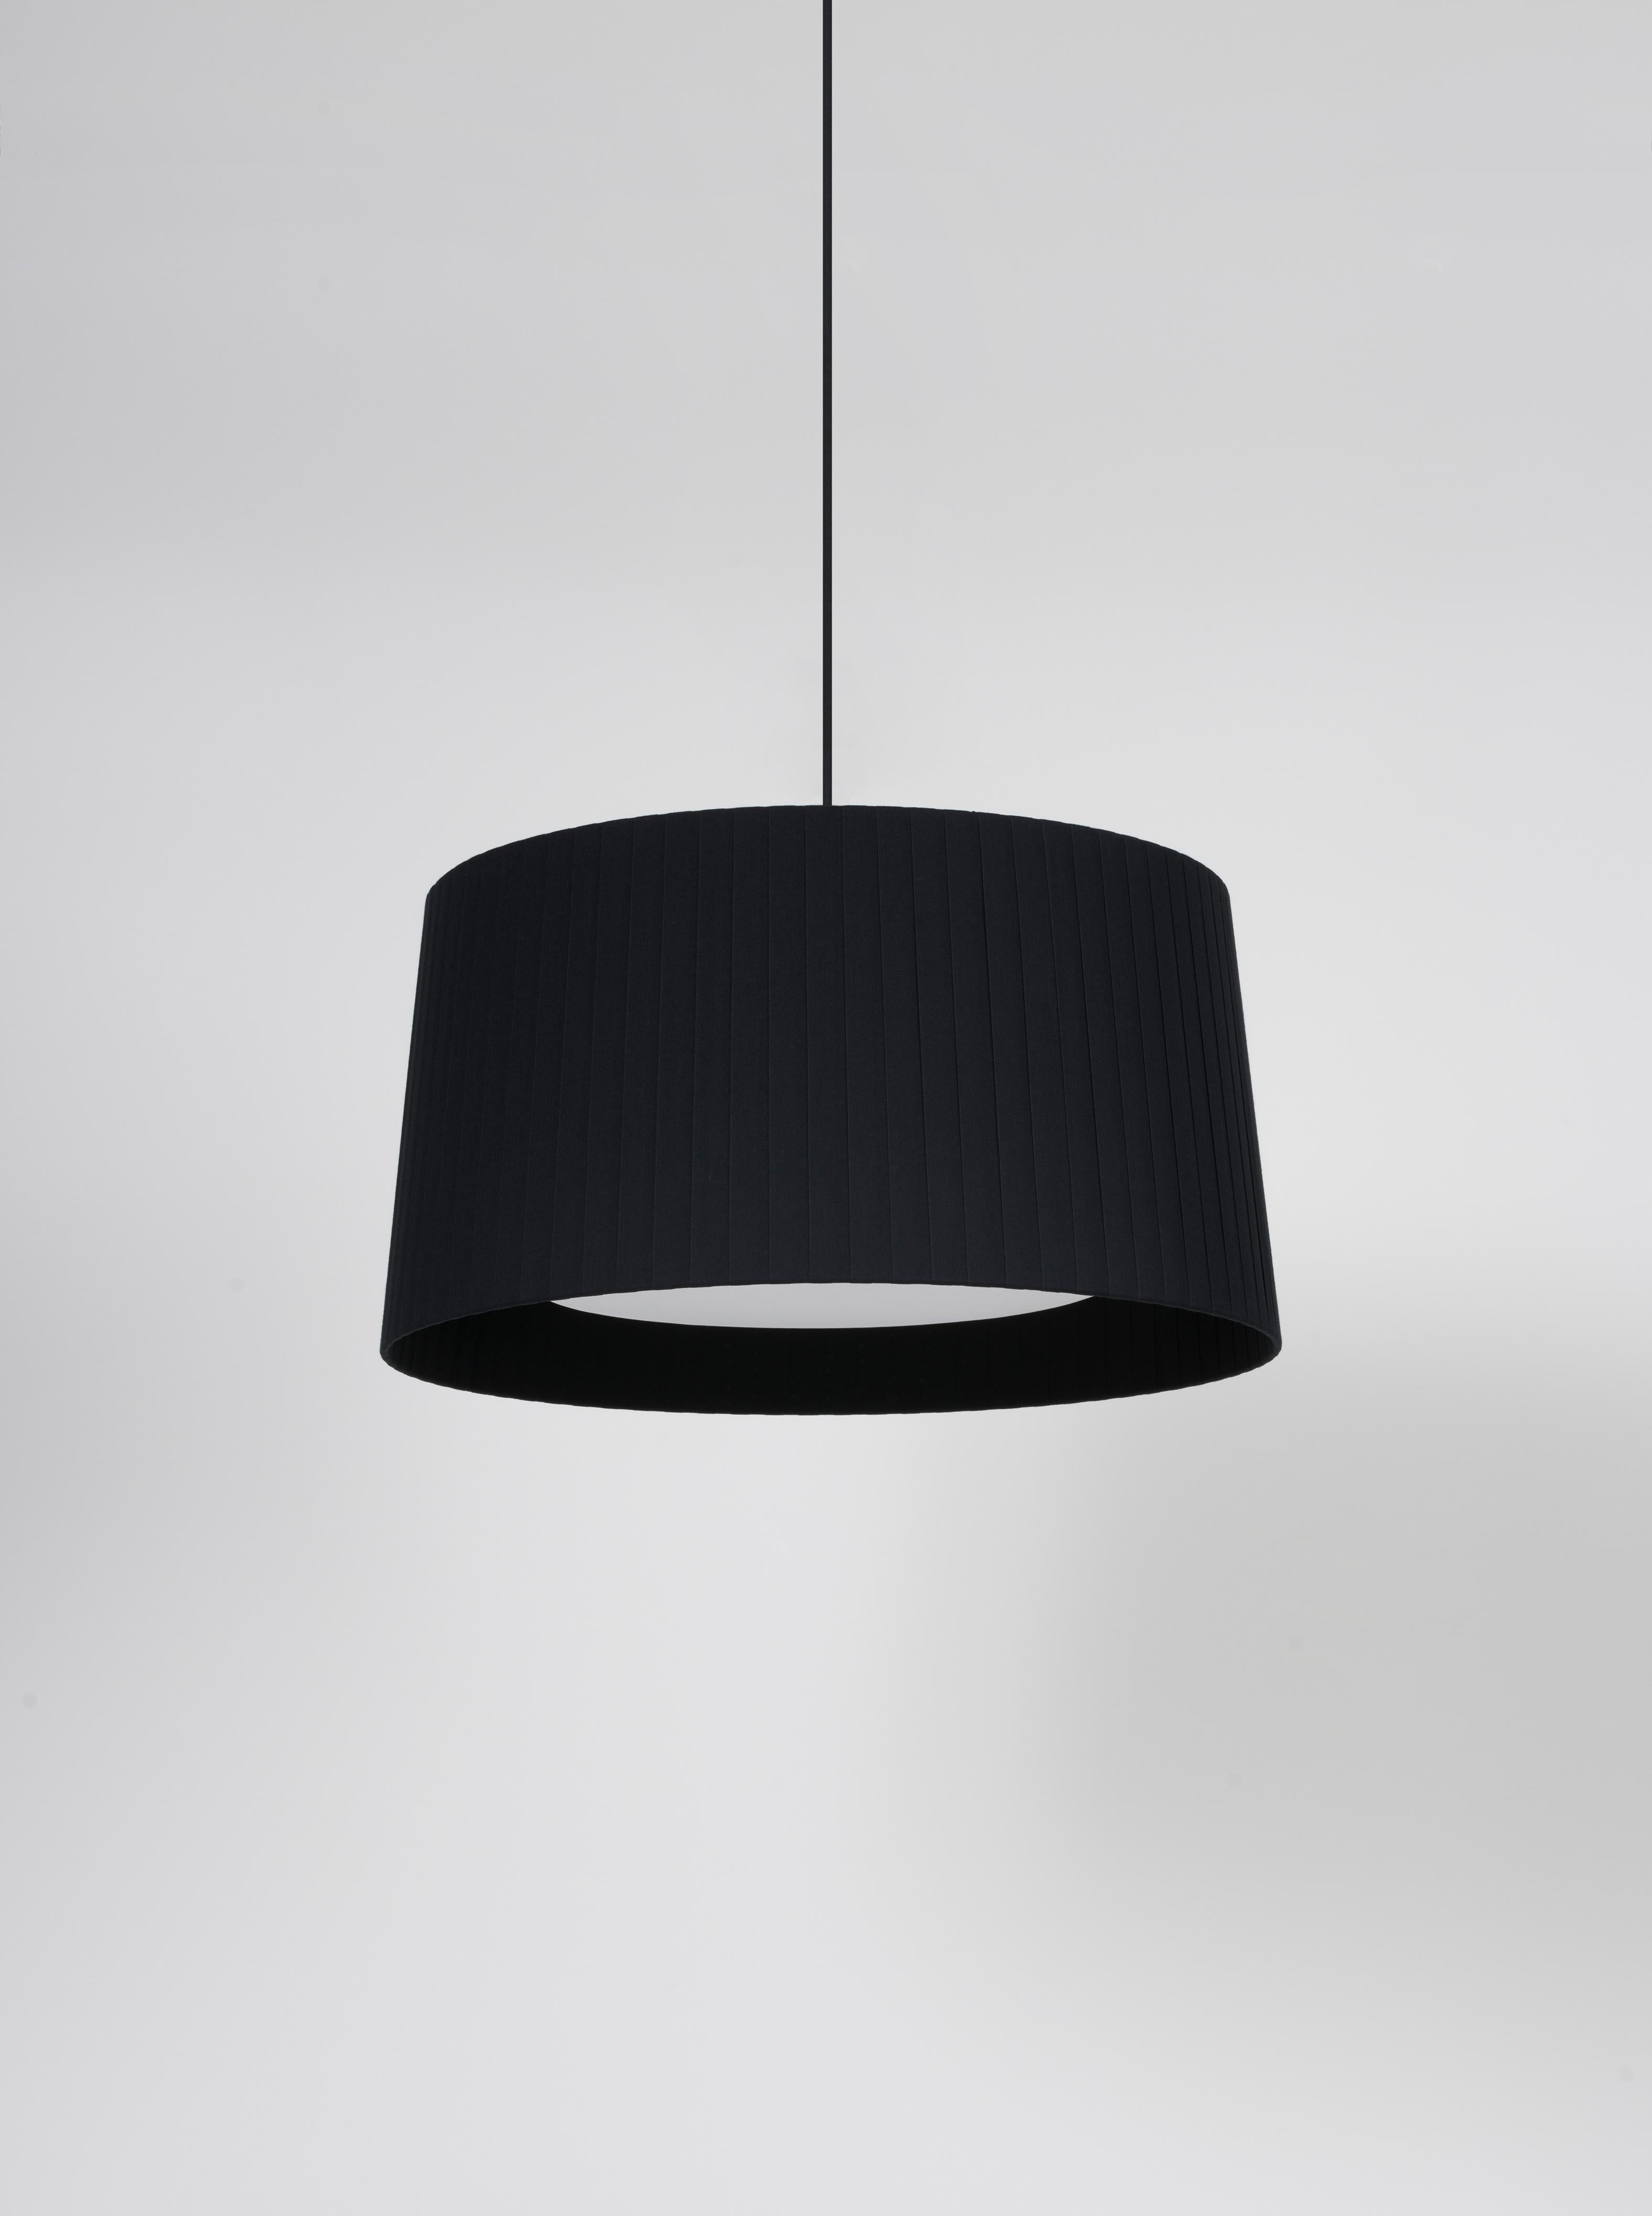 Black GT5 pendant lamp by Santa & Cole.
Dimensions: D 62 x H 32 cm.
Materials: Metal, ribbon.
Available in other colors. Available in 2 lights version.

Designed for intermediate volumes and household areas, GT5 and GT6 are hanging lamps with